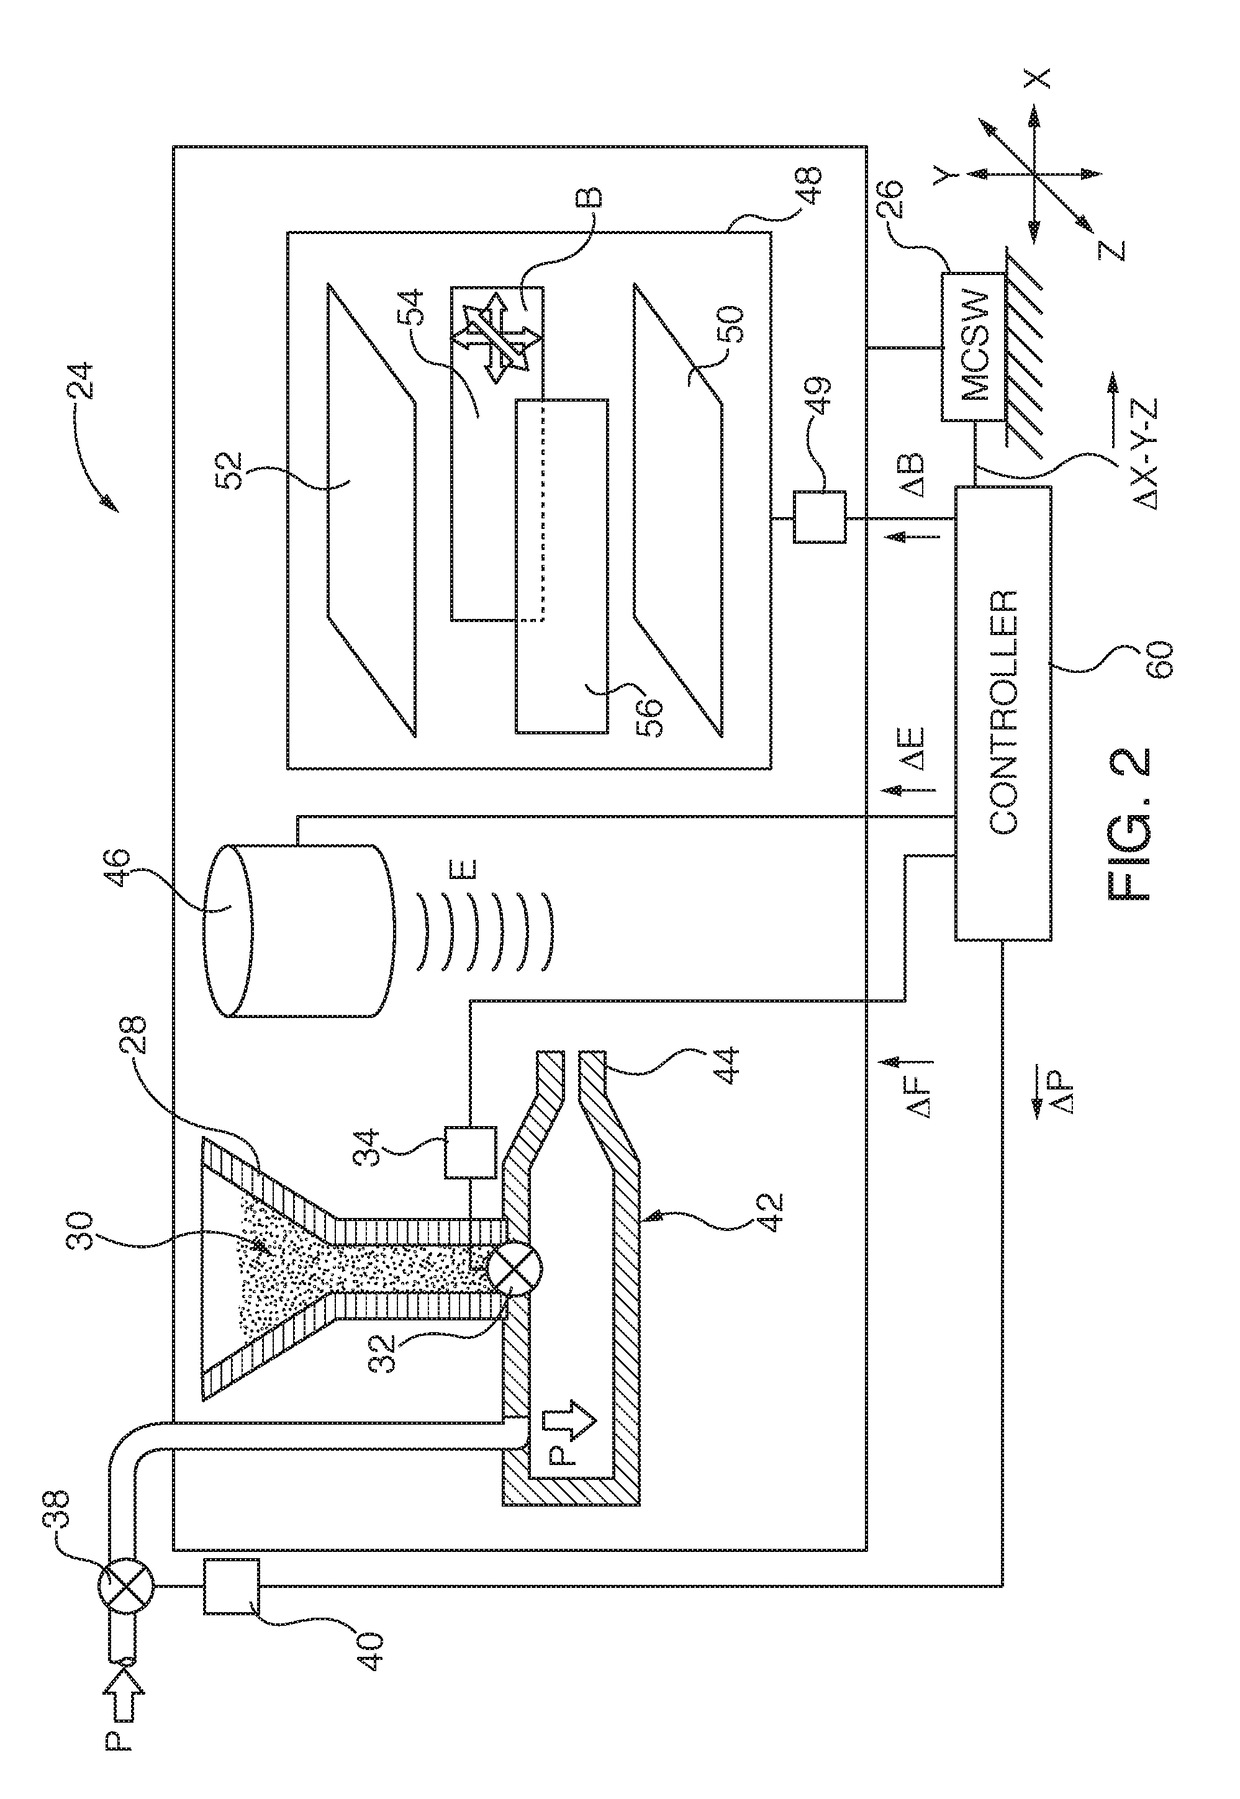 Method and apparatus for levitation additive welding of superalloy components